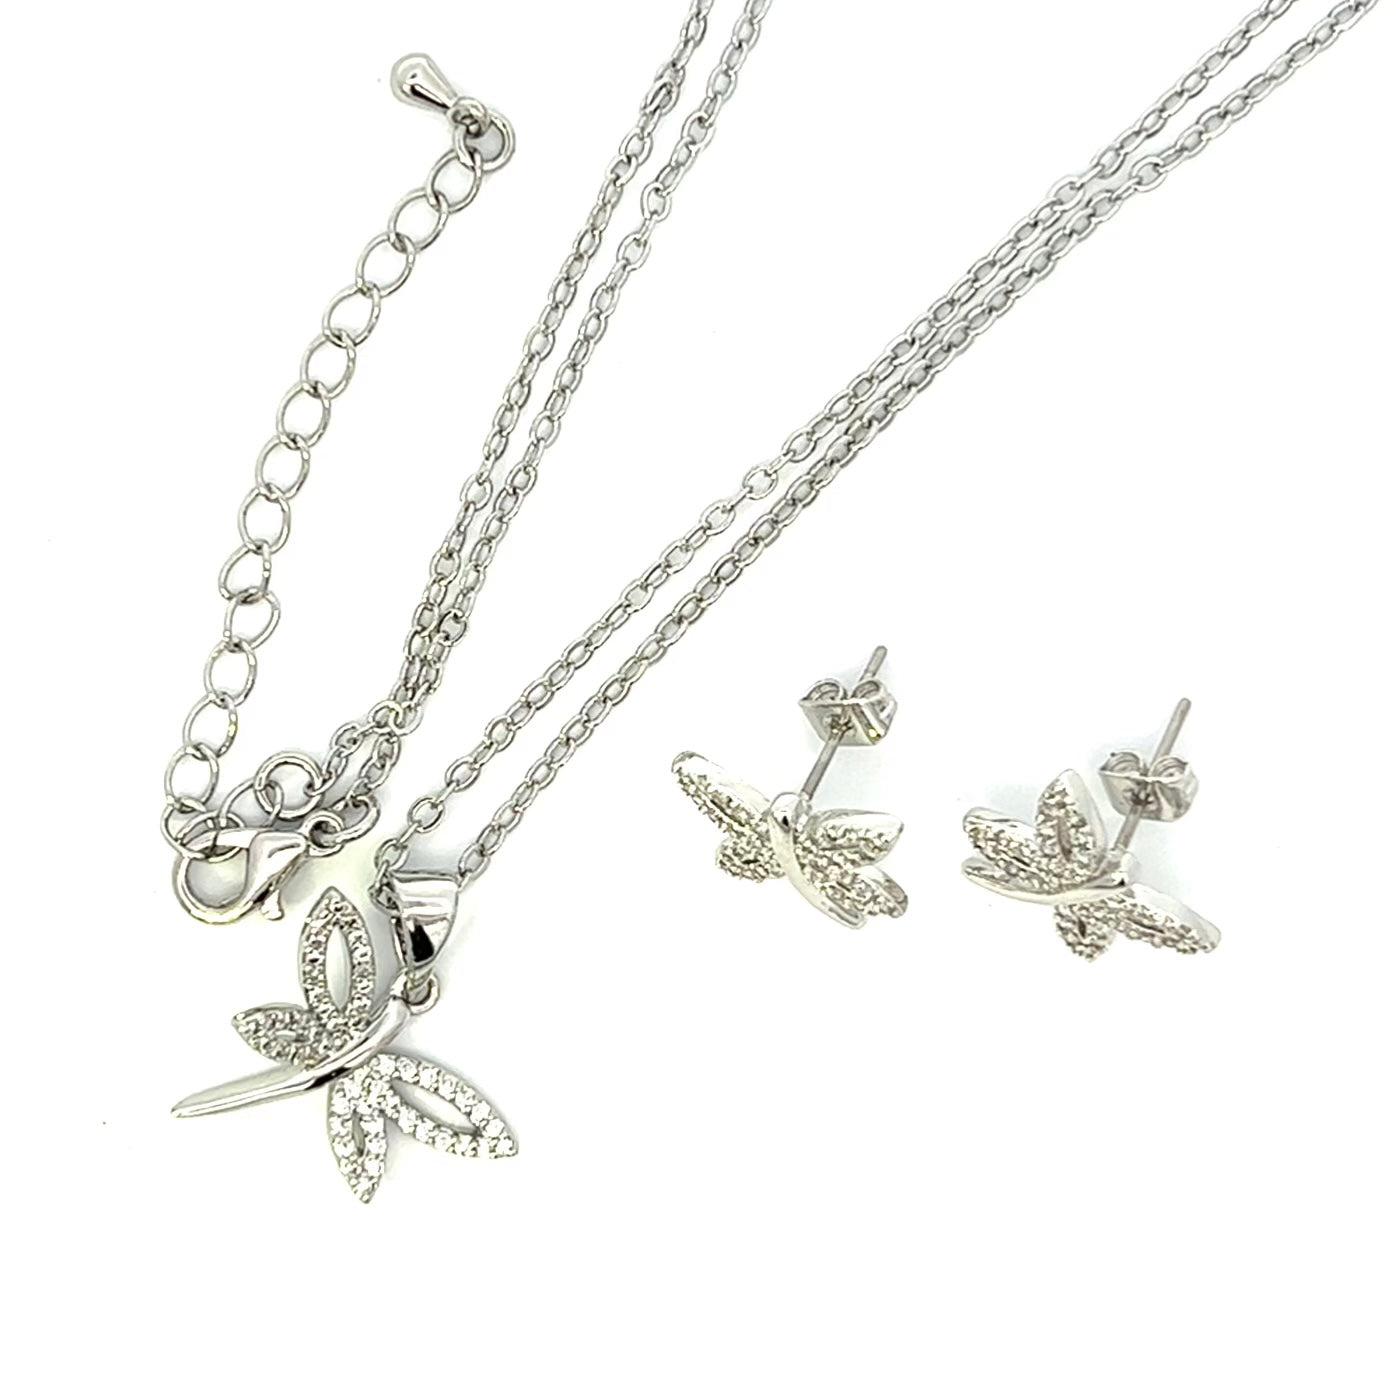 Sparkly Dragonfly Pendant Necklace and Earrings Set Silver